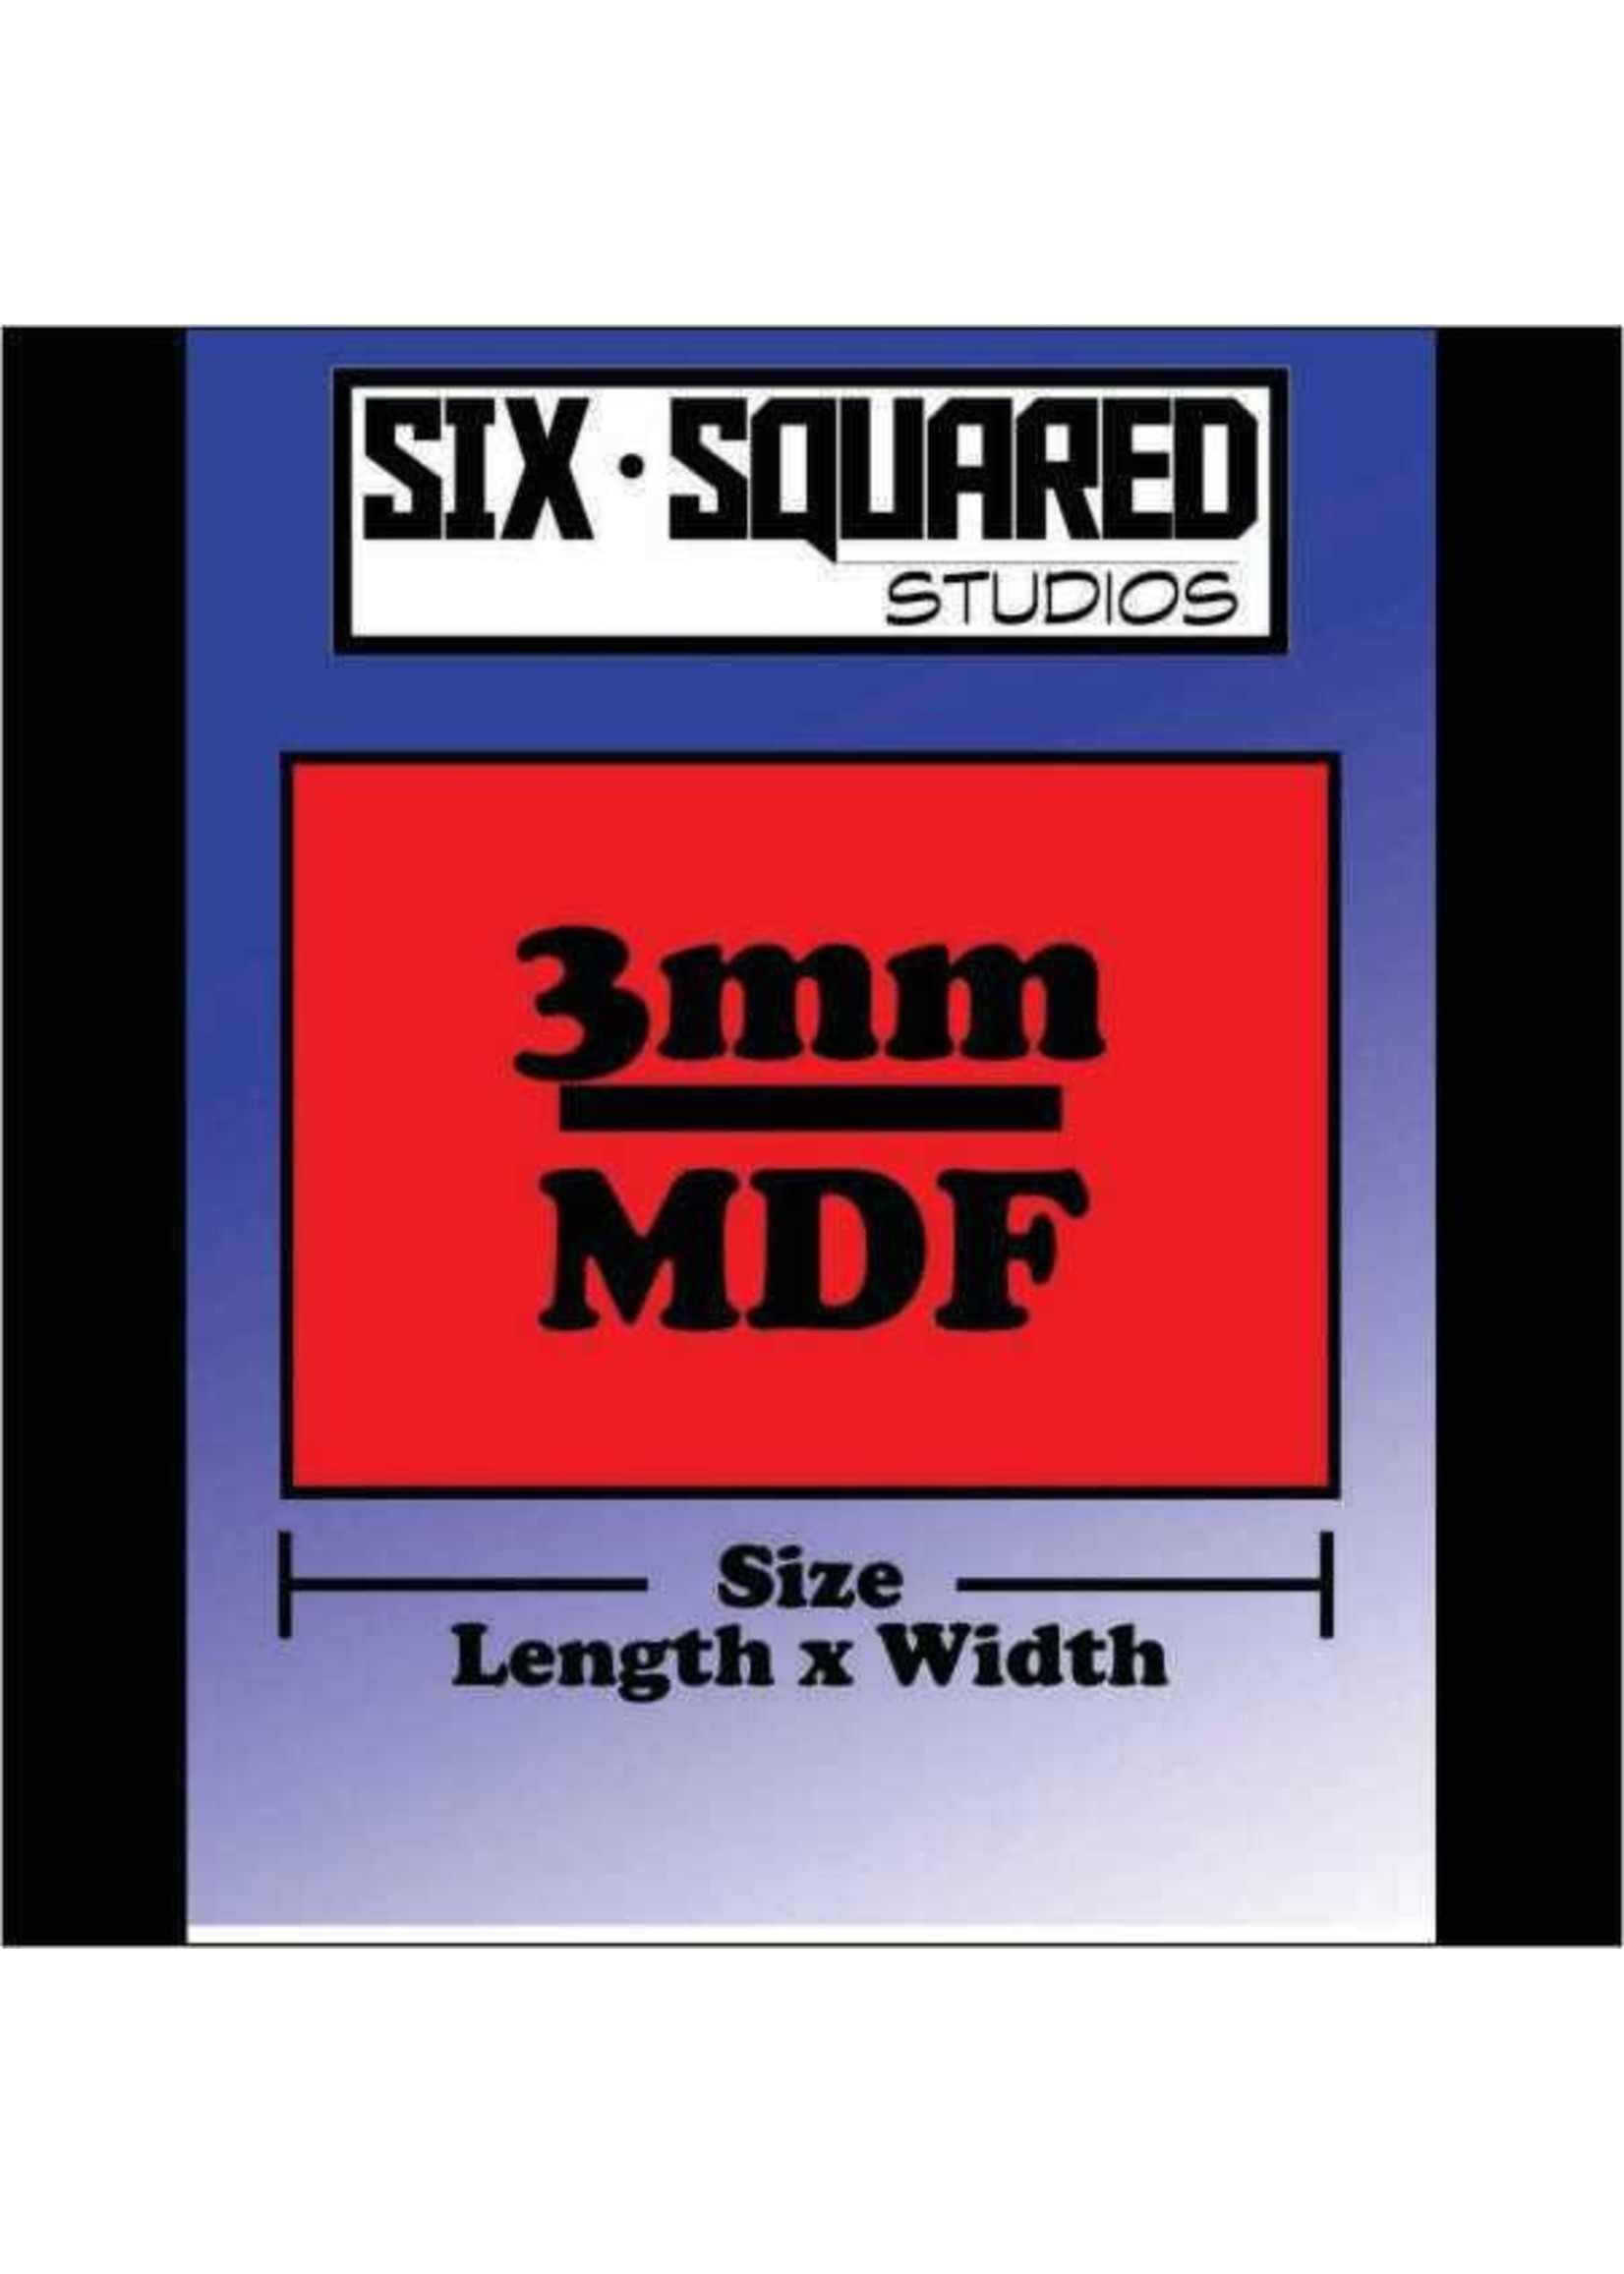 6 Squared Studios 30mm x 40mm MDF rectangle bases